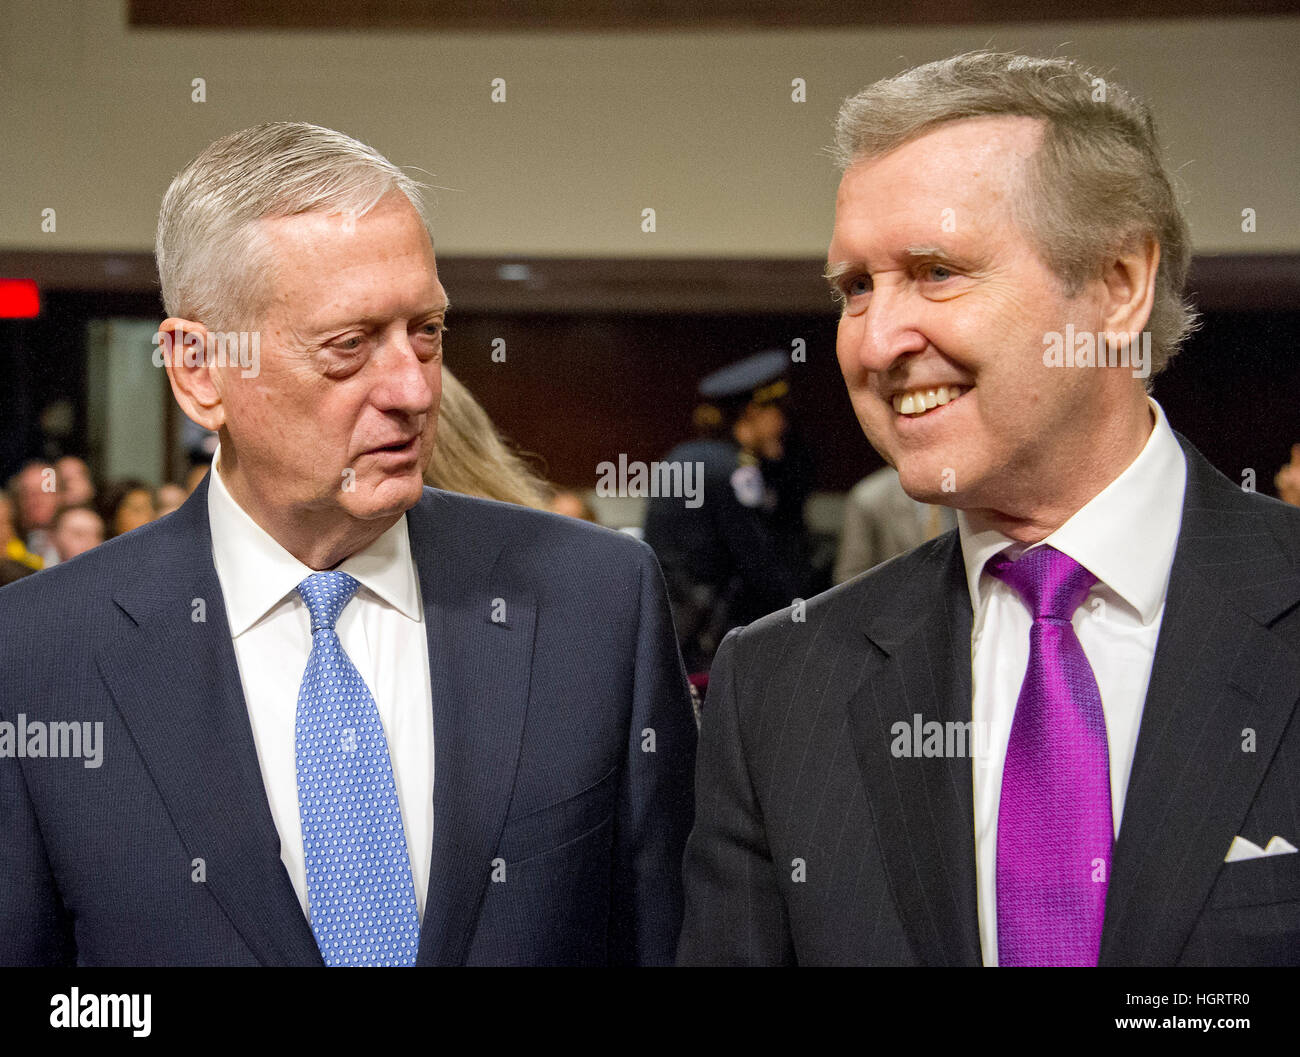 Washington DC, USA. 12th January 2017. US Marine Corps General James N. Mattis (retired), left and former US Secretary of Defense William Cohen, right, share a thought prior to the US Senate Committee on Armed Services confirmation hearing on Mattis' nomination to be US Secretary of Defense on Capitol Hill in Washington, DC on Thursday, January 12, 2017. Cohen, who also served in the US Senate as a Republican from Maine, introduced and endorsed Mattis. Credit: MediaPunch Inc/Alamy Live News Stock Photo